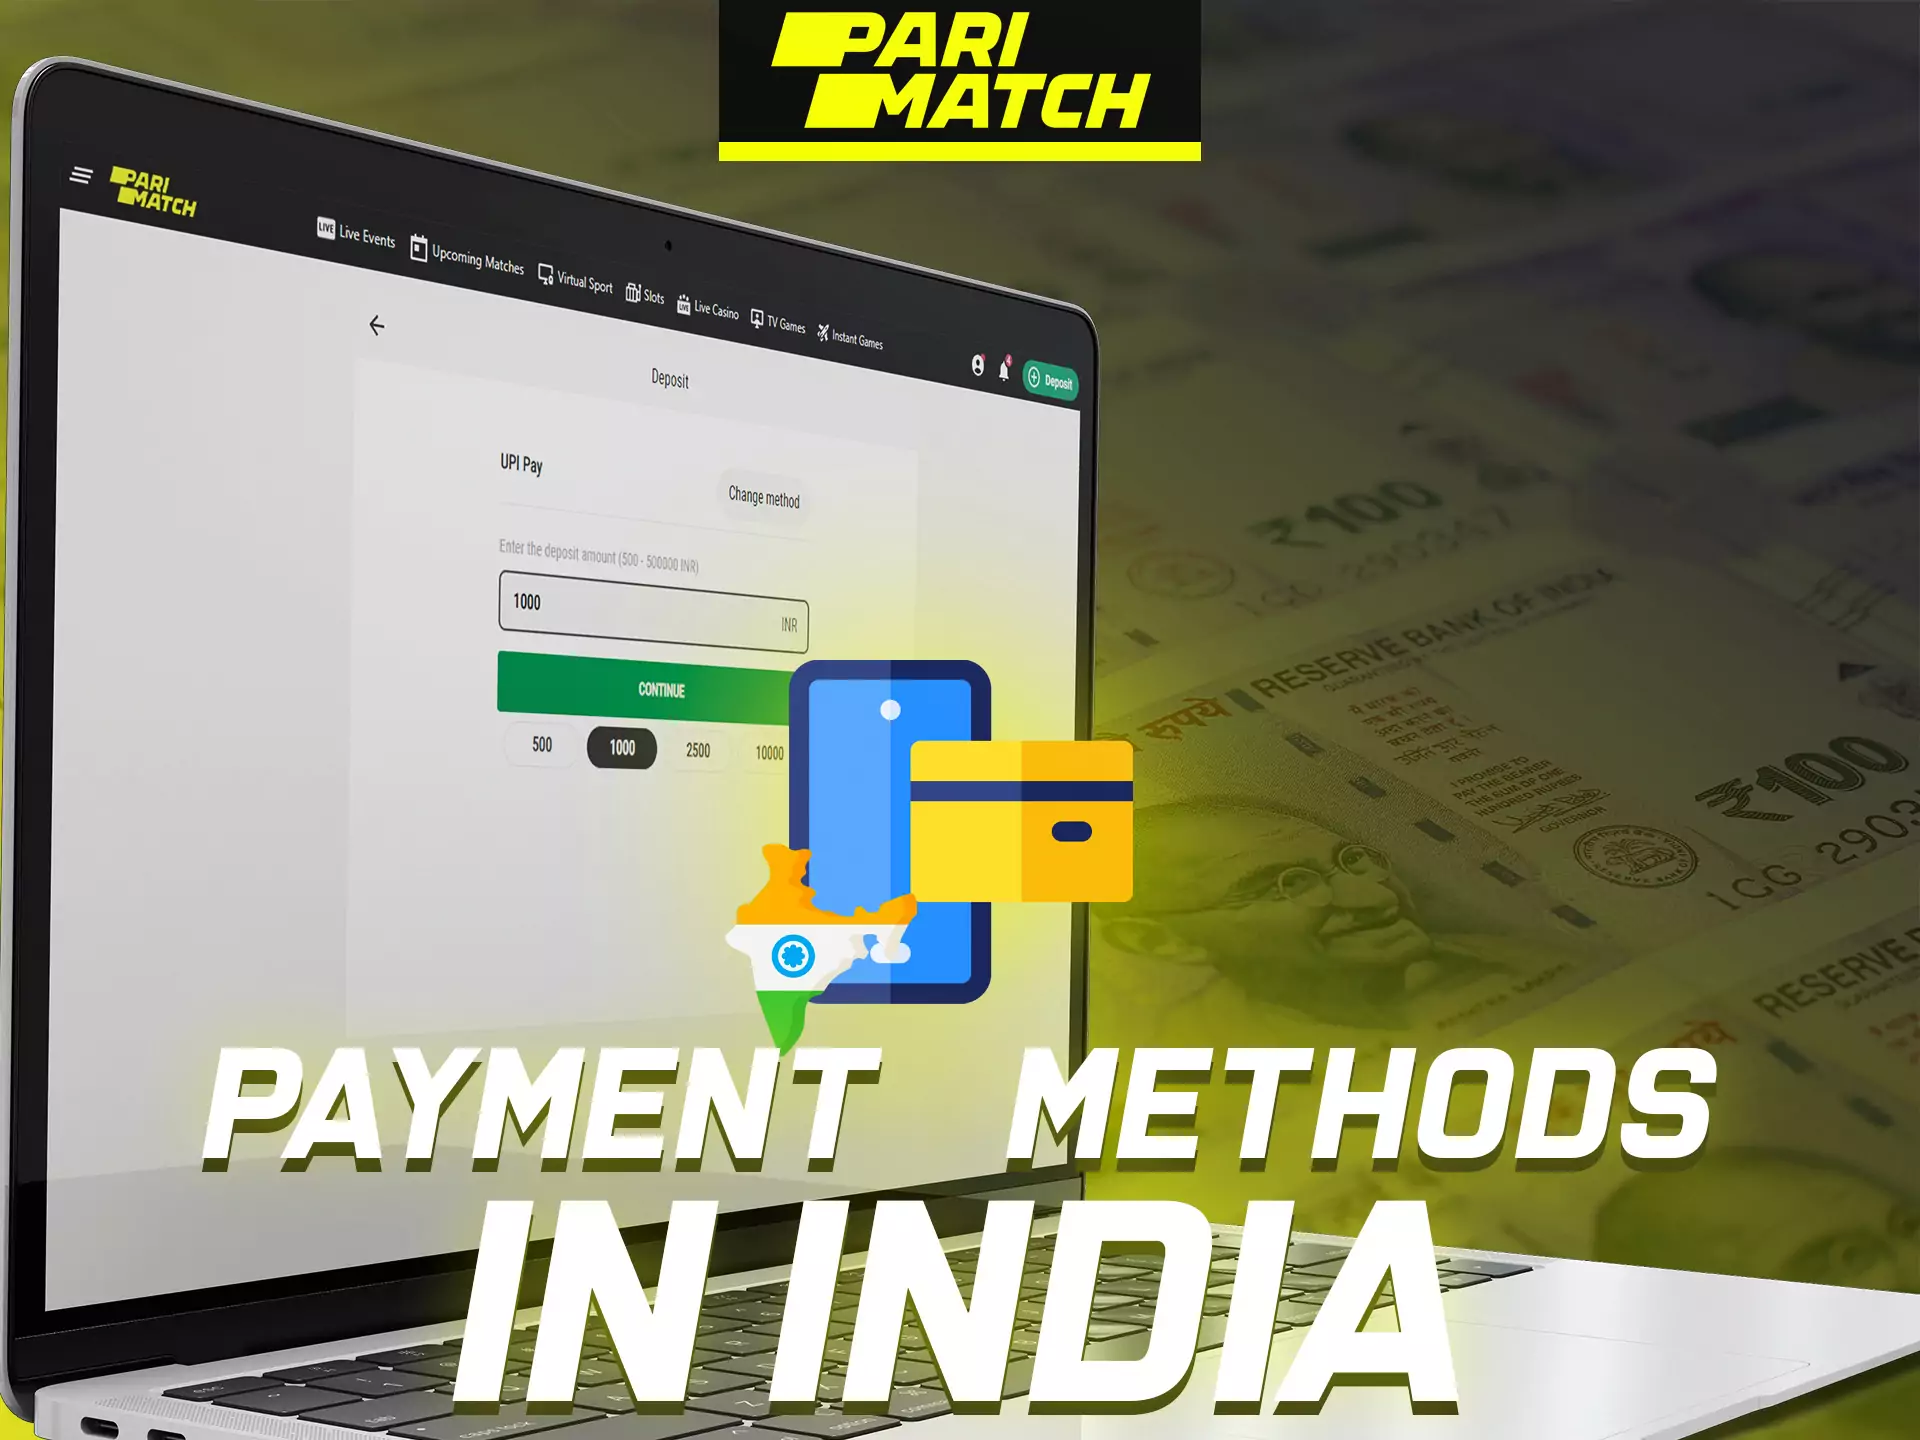 Learn more about different payment methods at Parimatch.